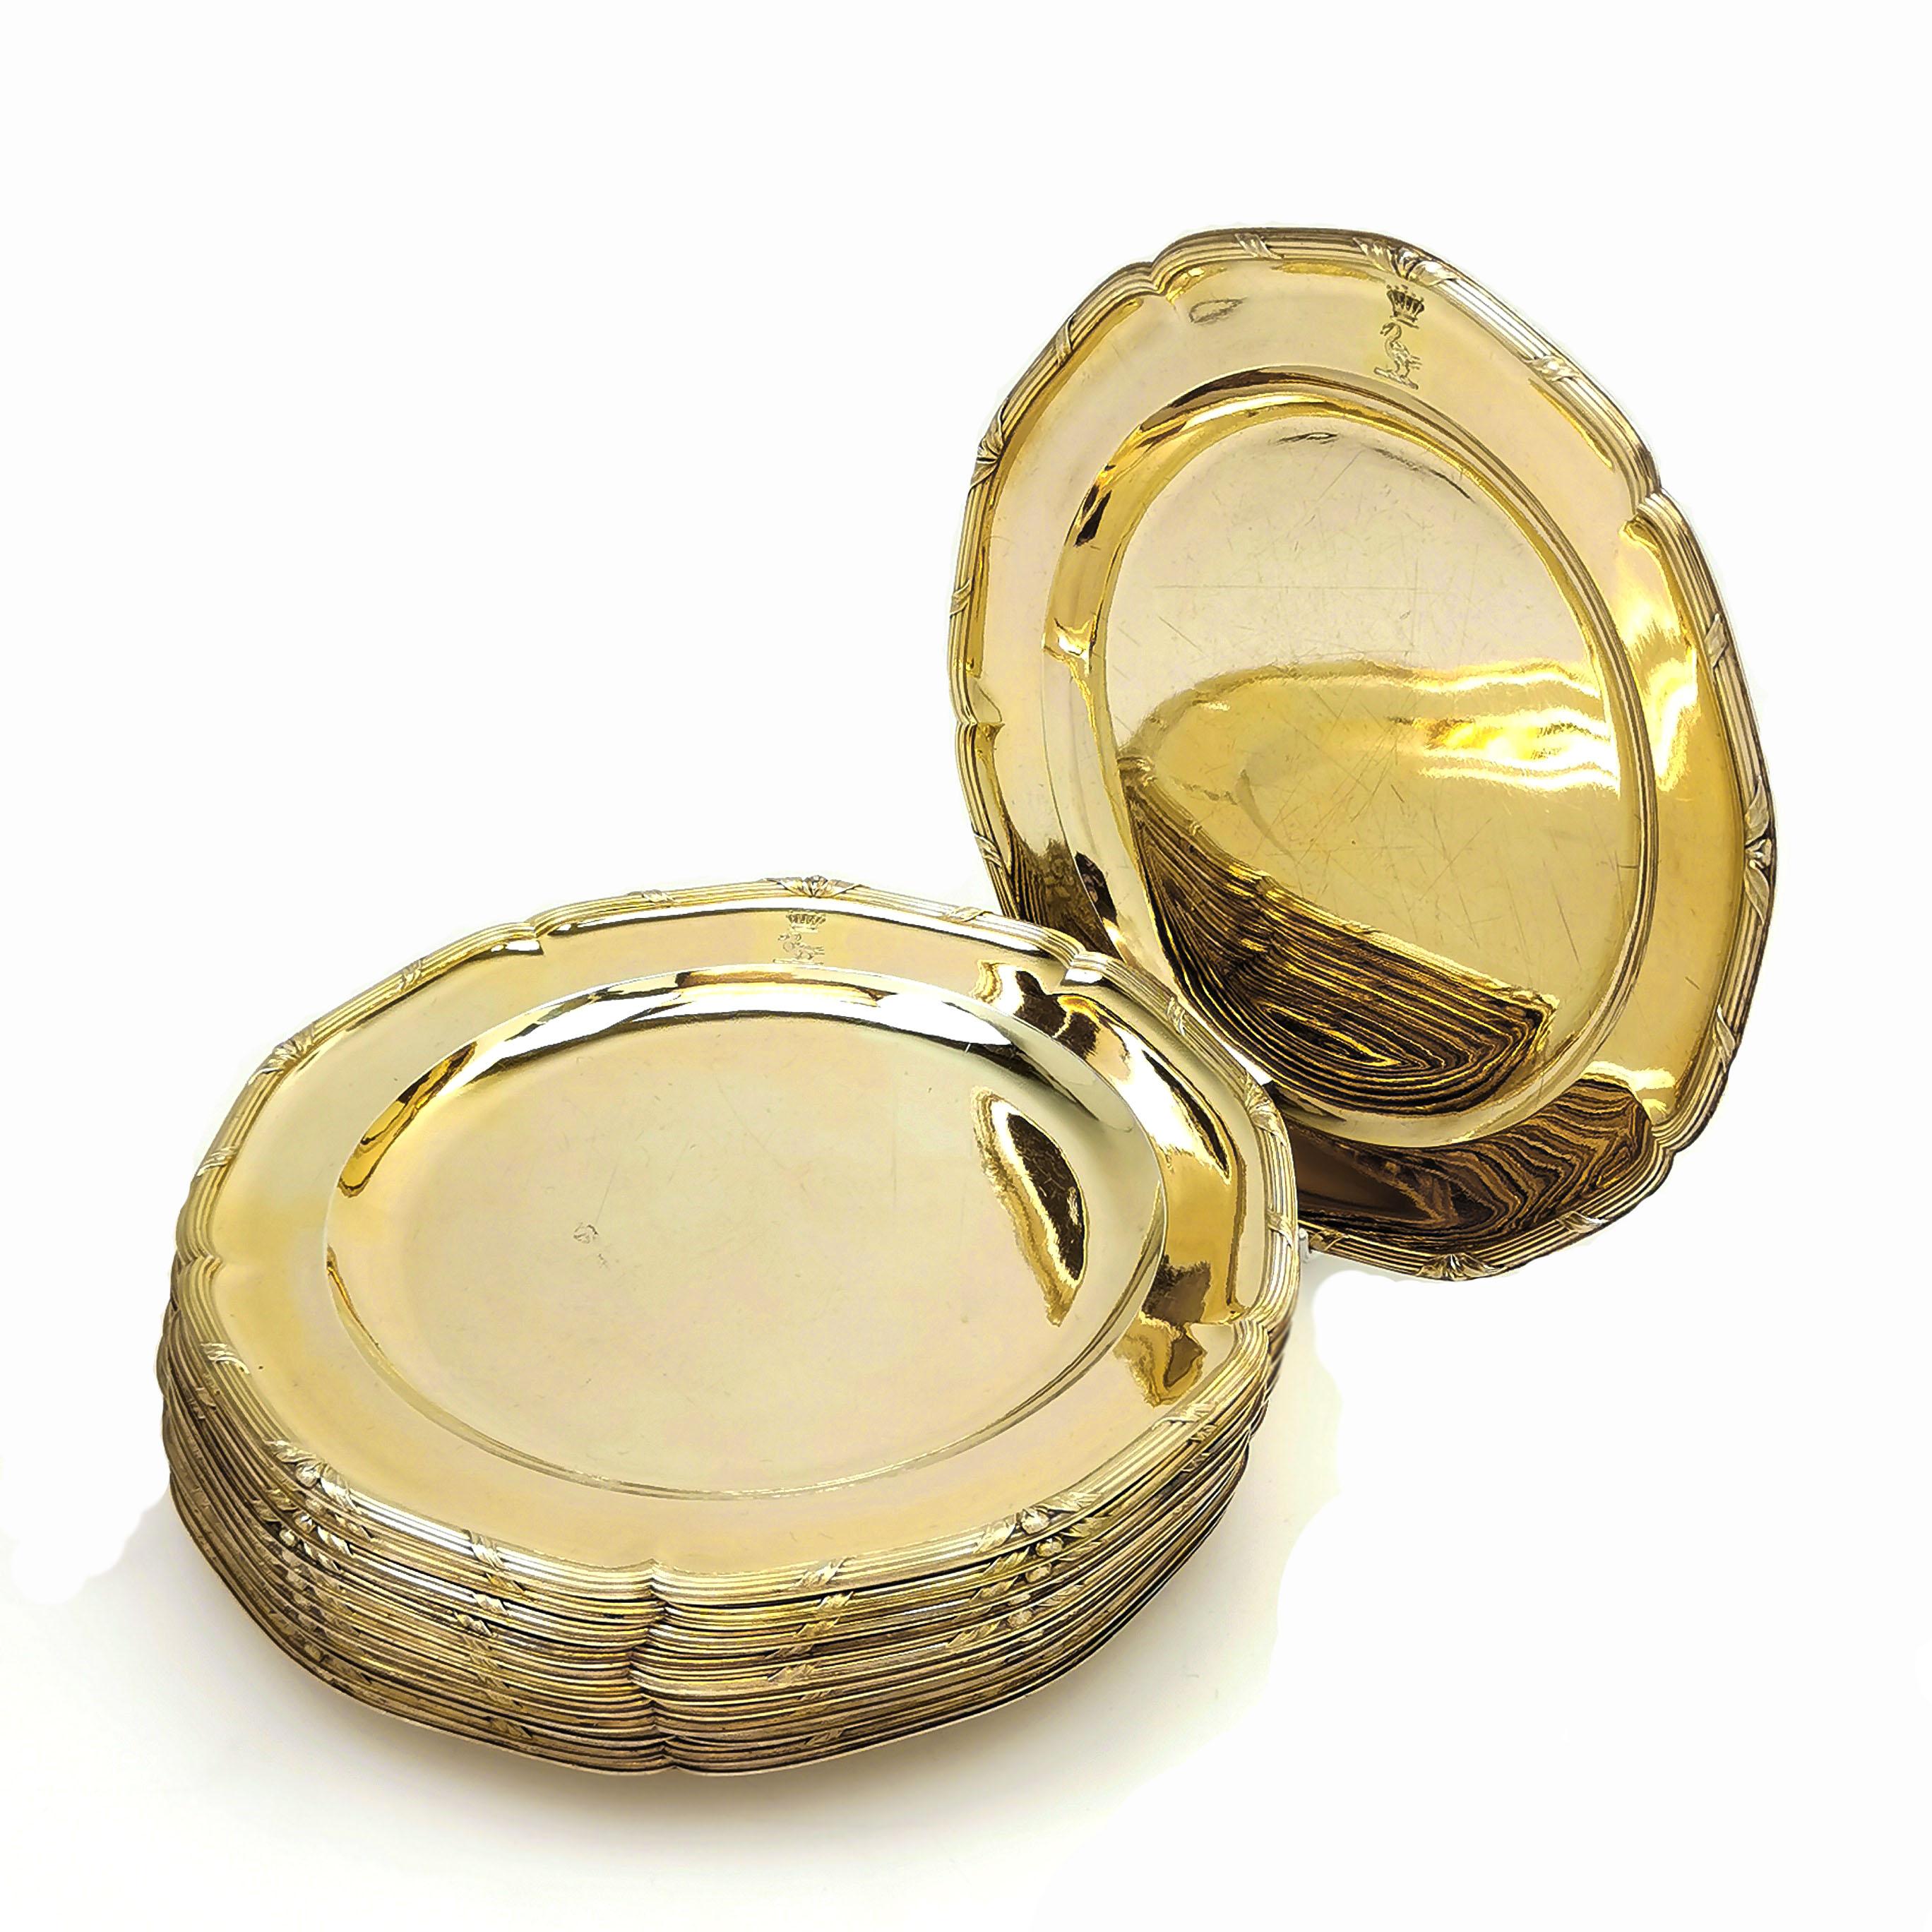 A magnificent set of 12 George III Sterling Silver Gilt Dinner Plates. These shaped round Plates have an elegant ribbon and reed border and each has an engraved crest on the rim. The set had a gilded finish.

Made in London in 1787 by John Wakelin &